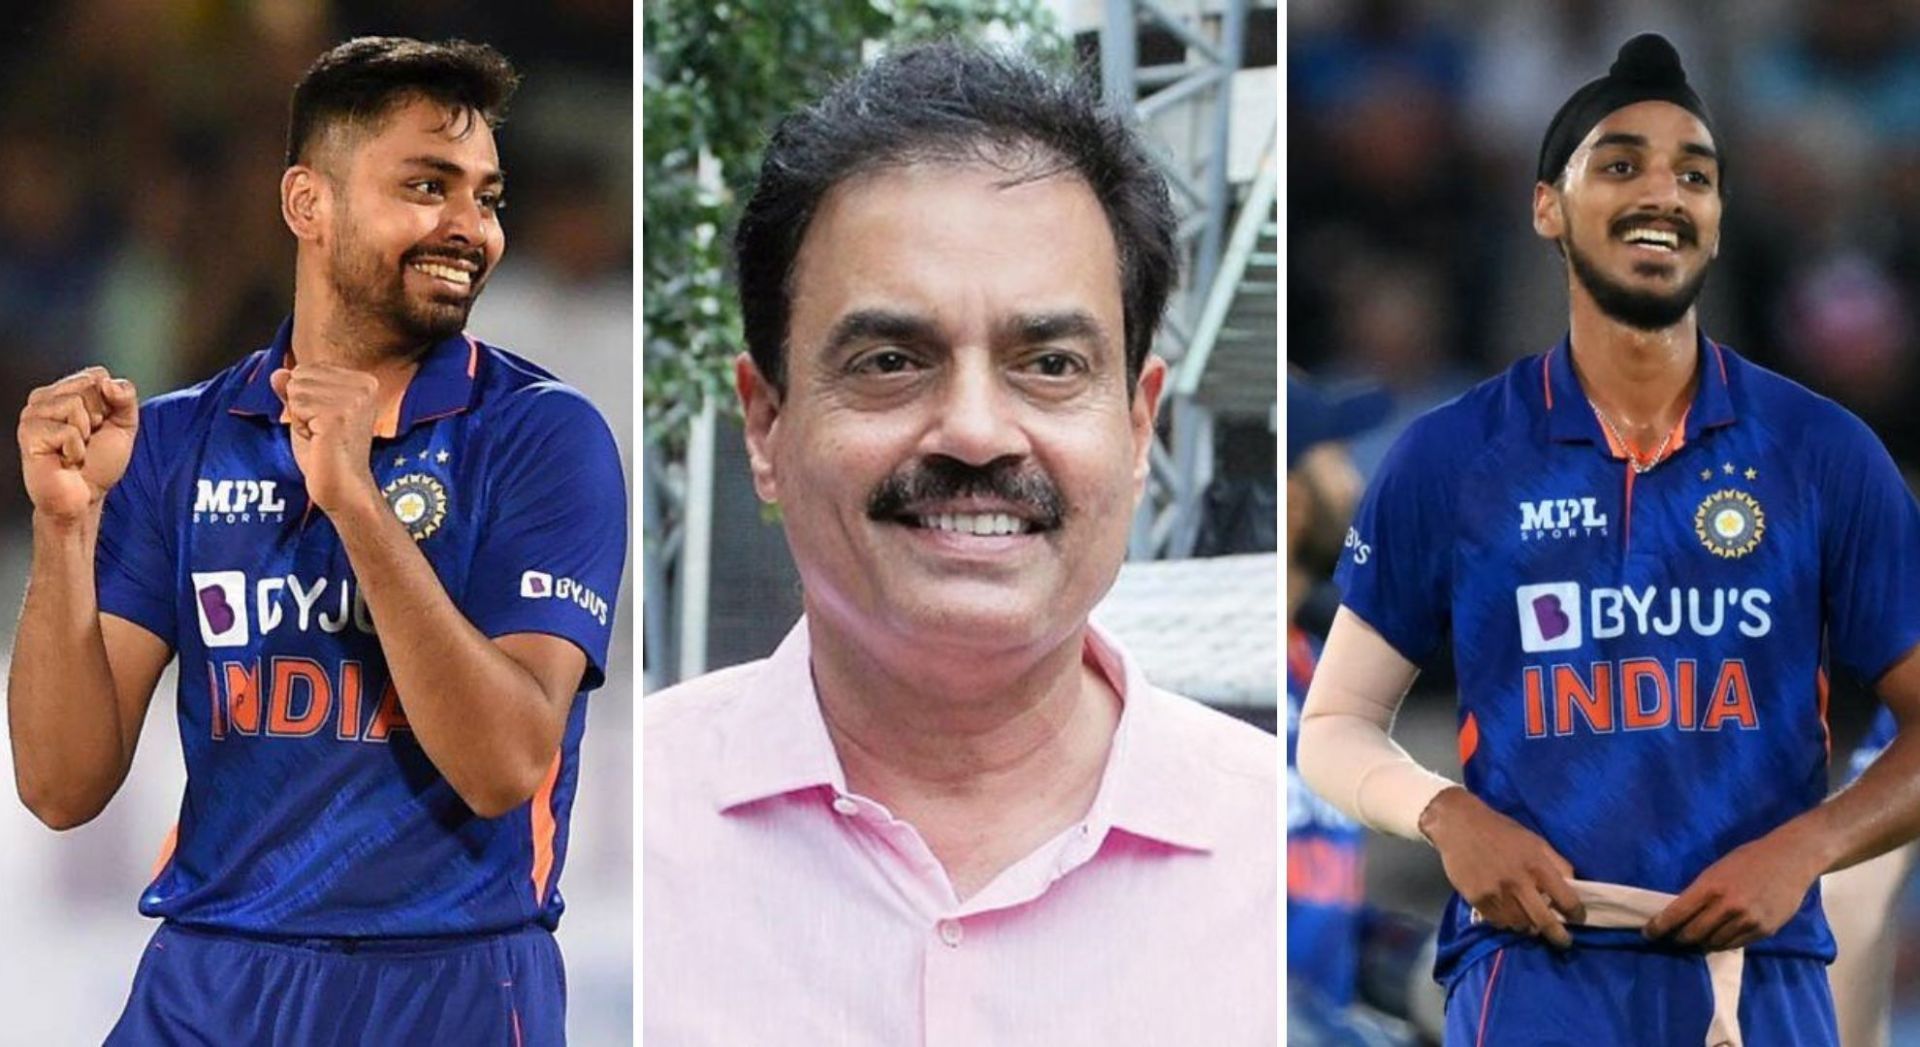 Vengsarkar feels Arshdeep Singh and Avesh Khan have already delivered in high-pressure IPL matches.